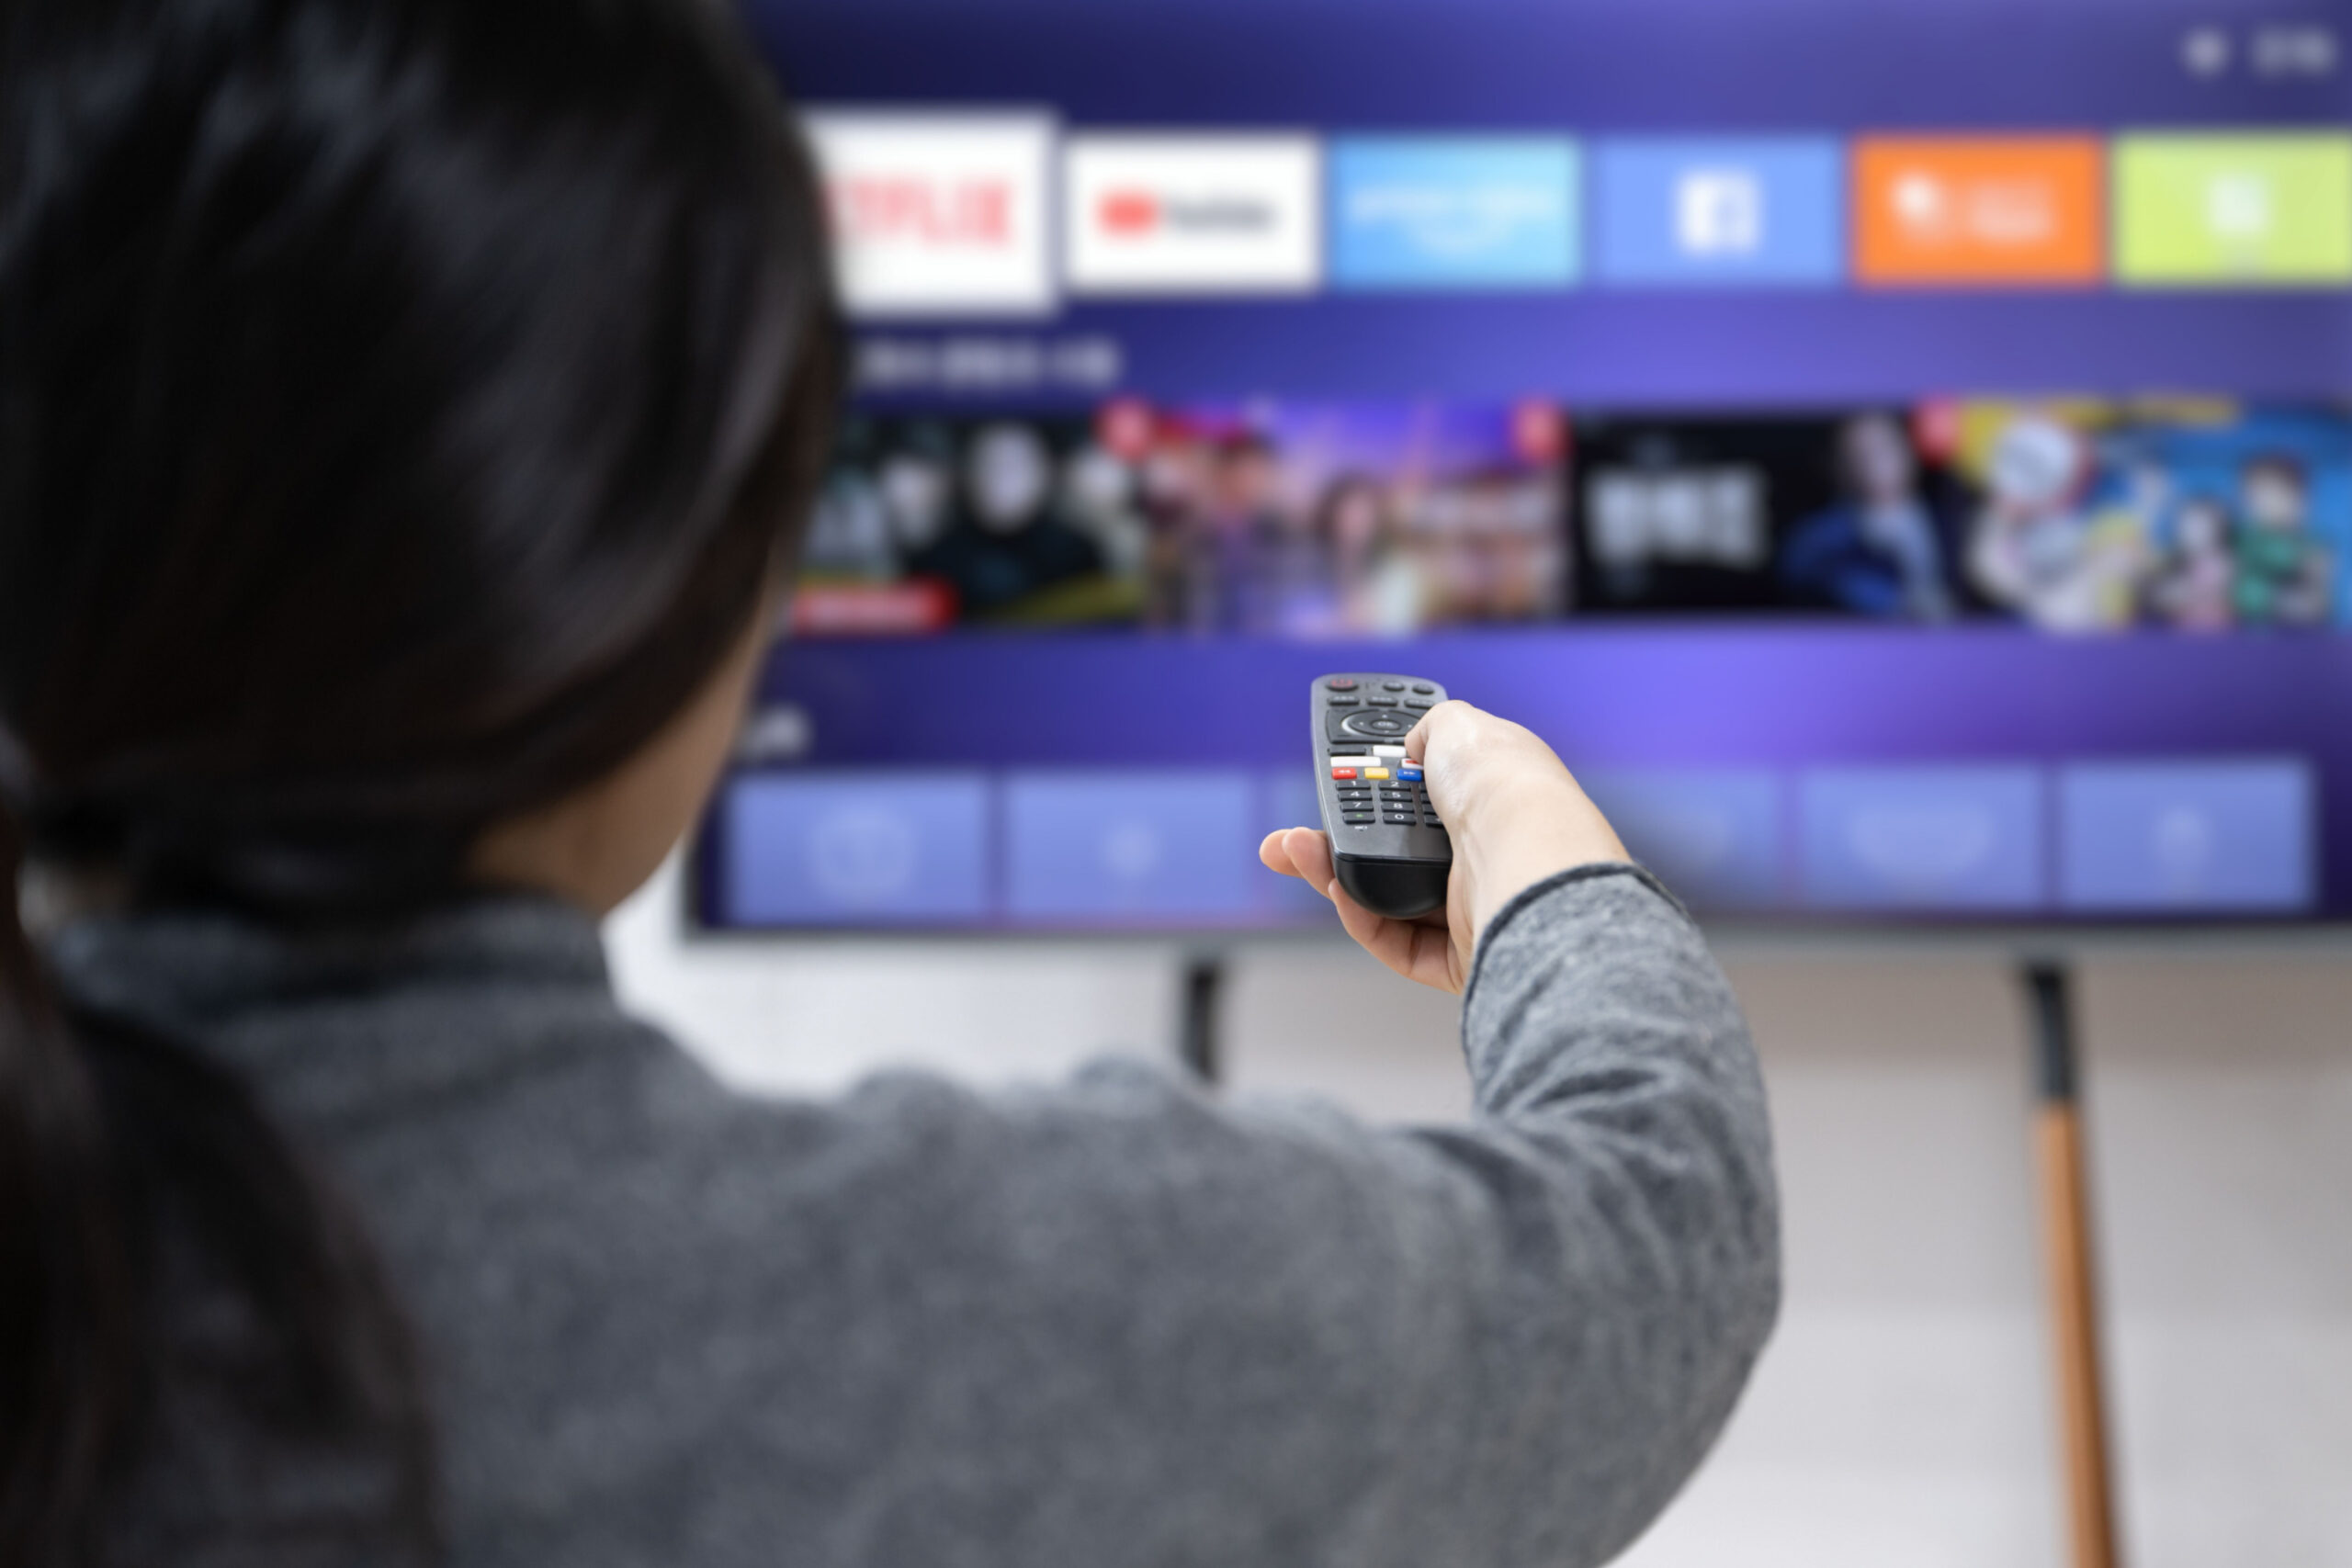 Best Live TV Streaming Services For 2023